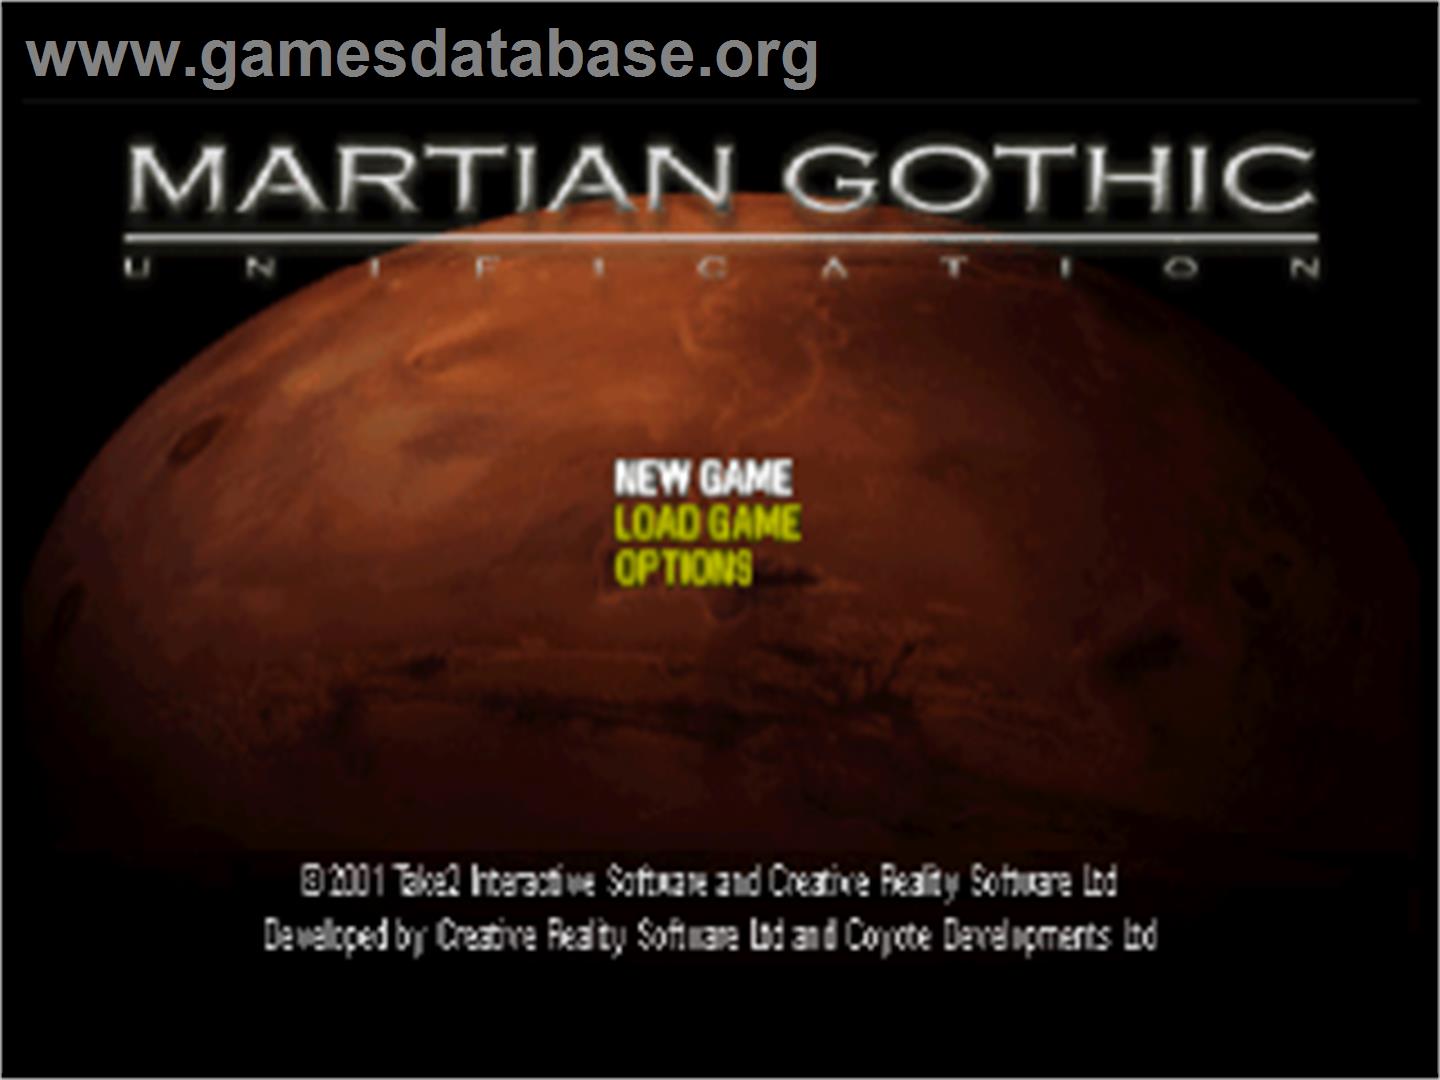 Martian Gothic: Unification - Sony Playstation - Artwork - Title Screen